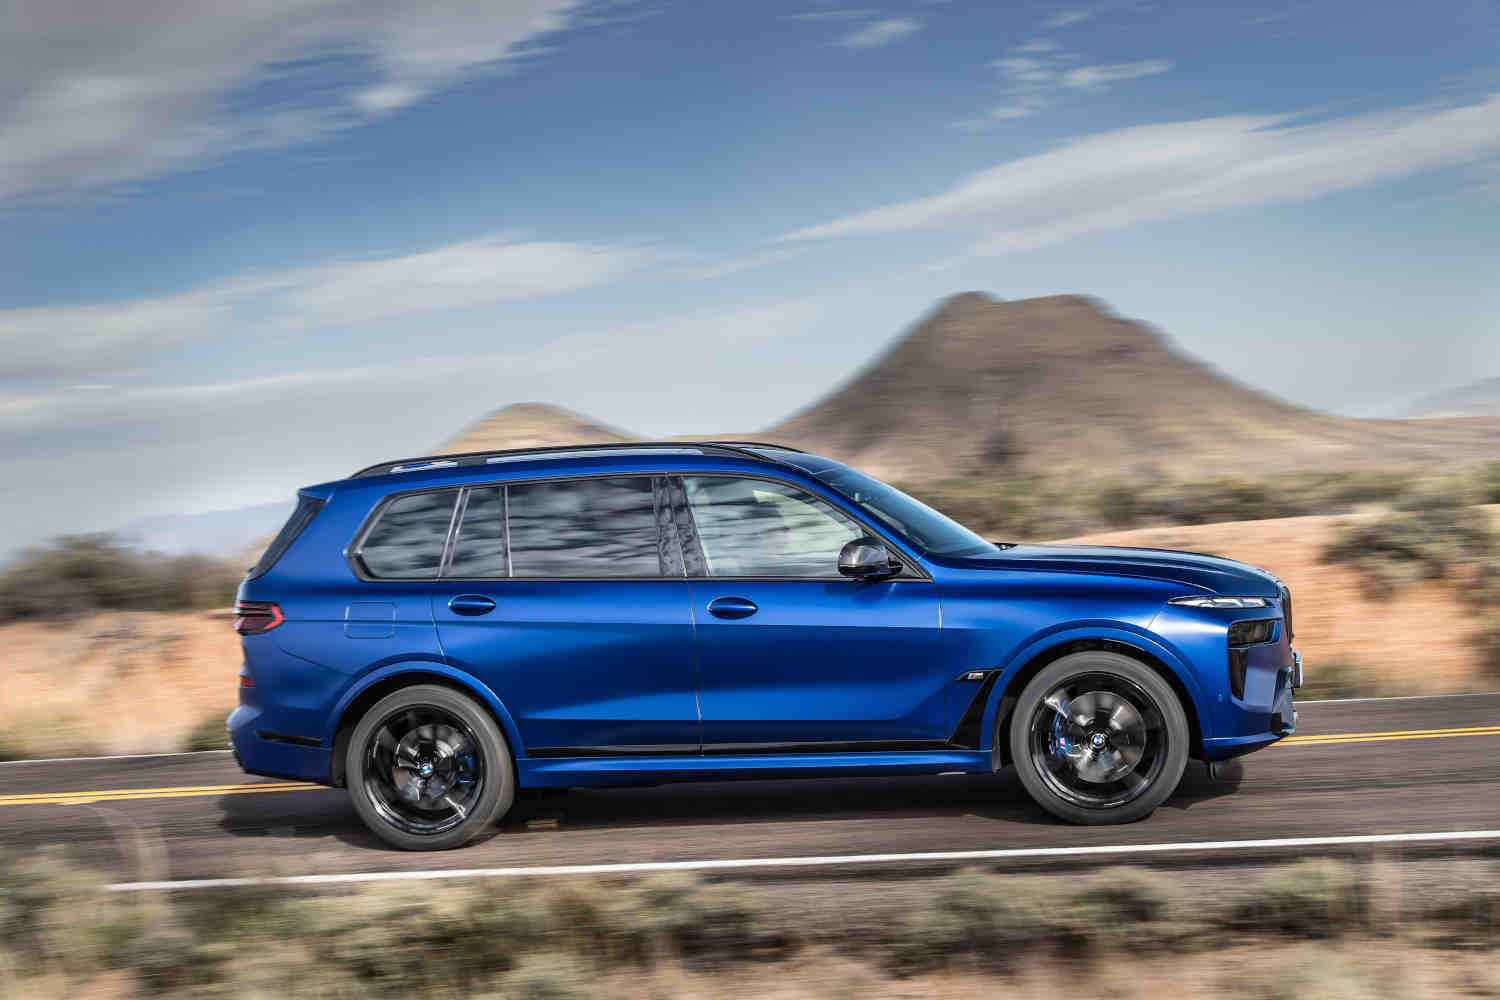 The BMW X7 is a luxury SUVs for tall drivers in 2023